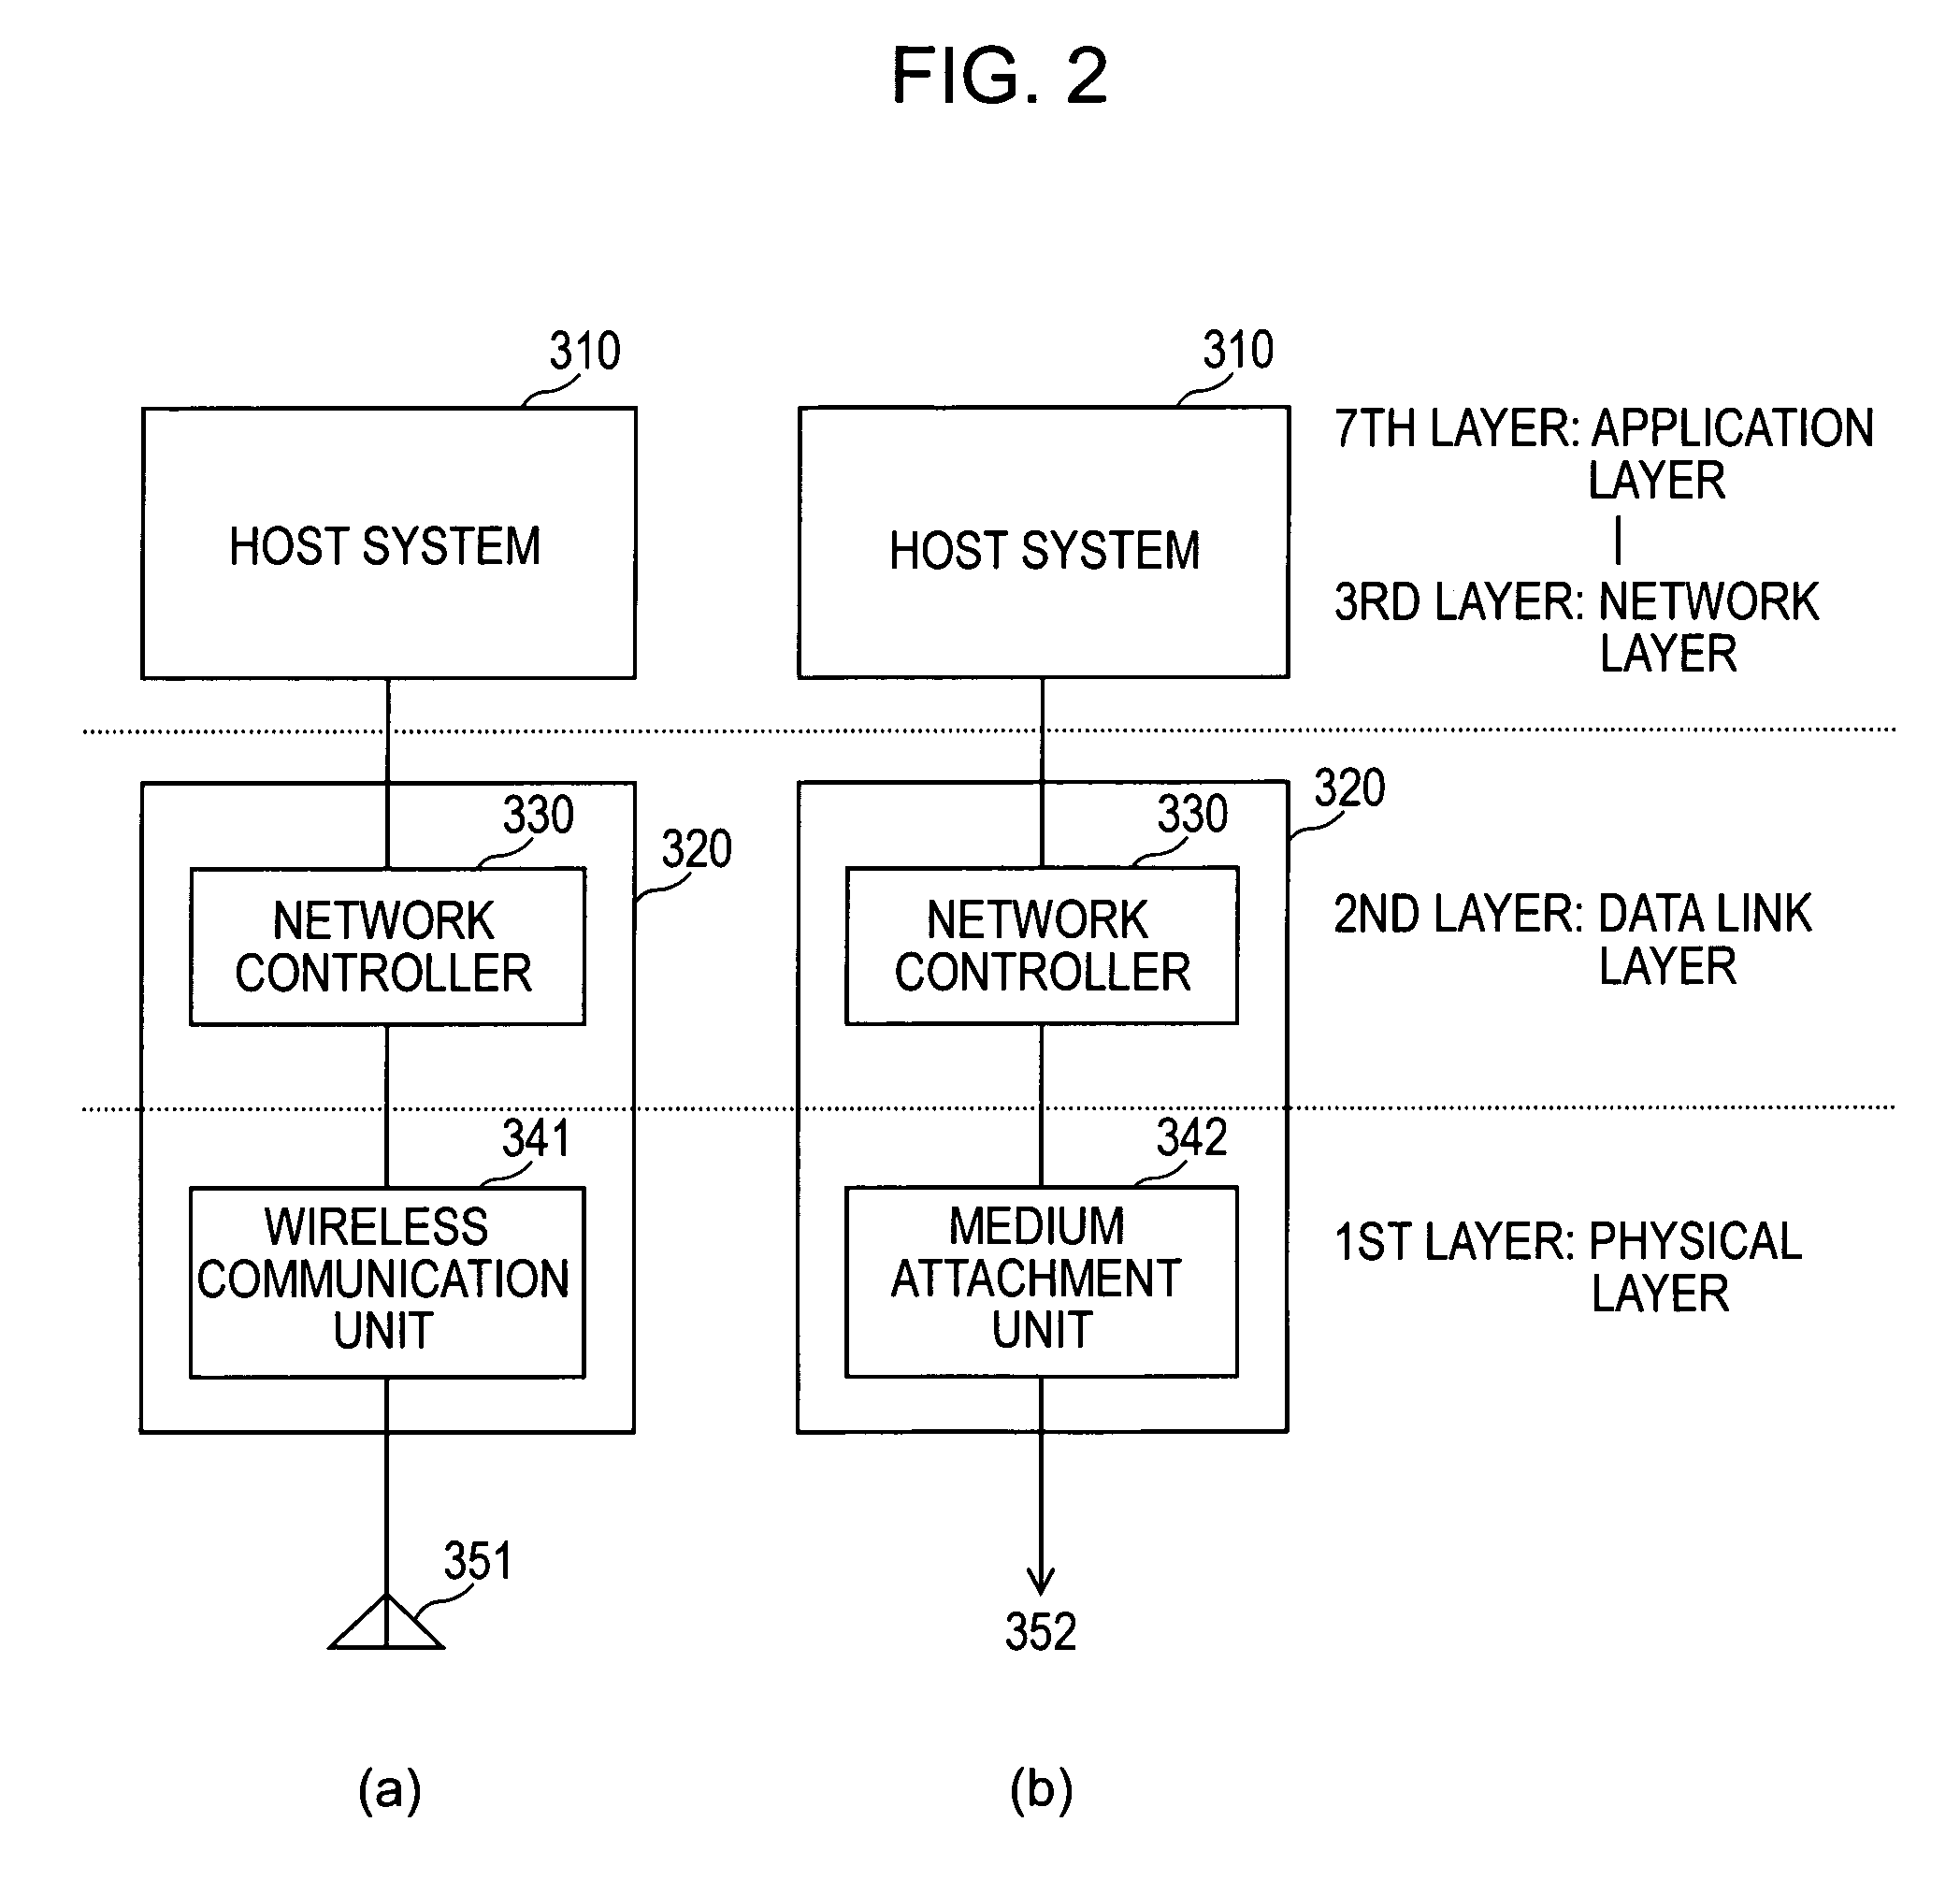 Network system and communication device